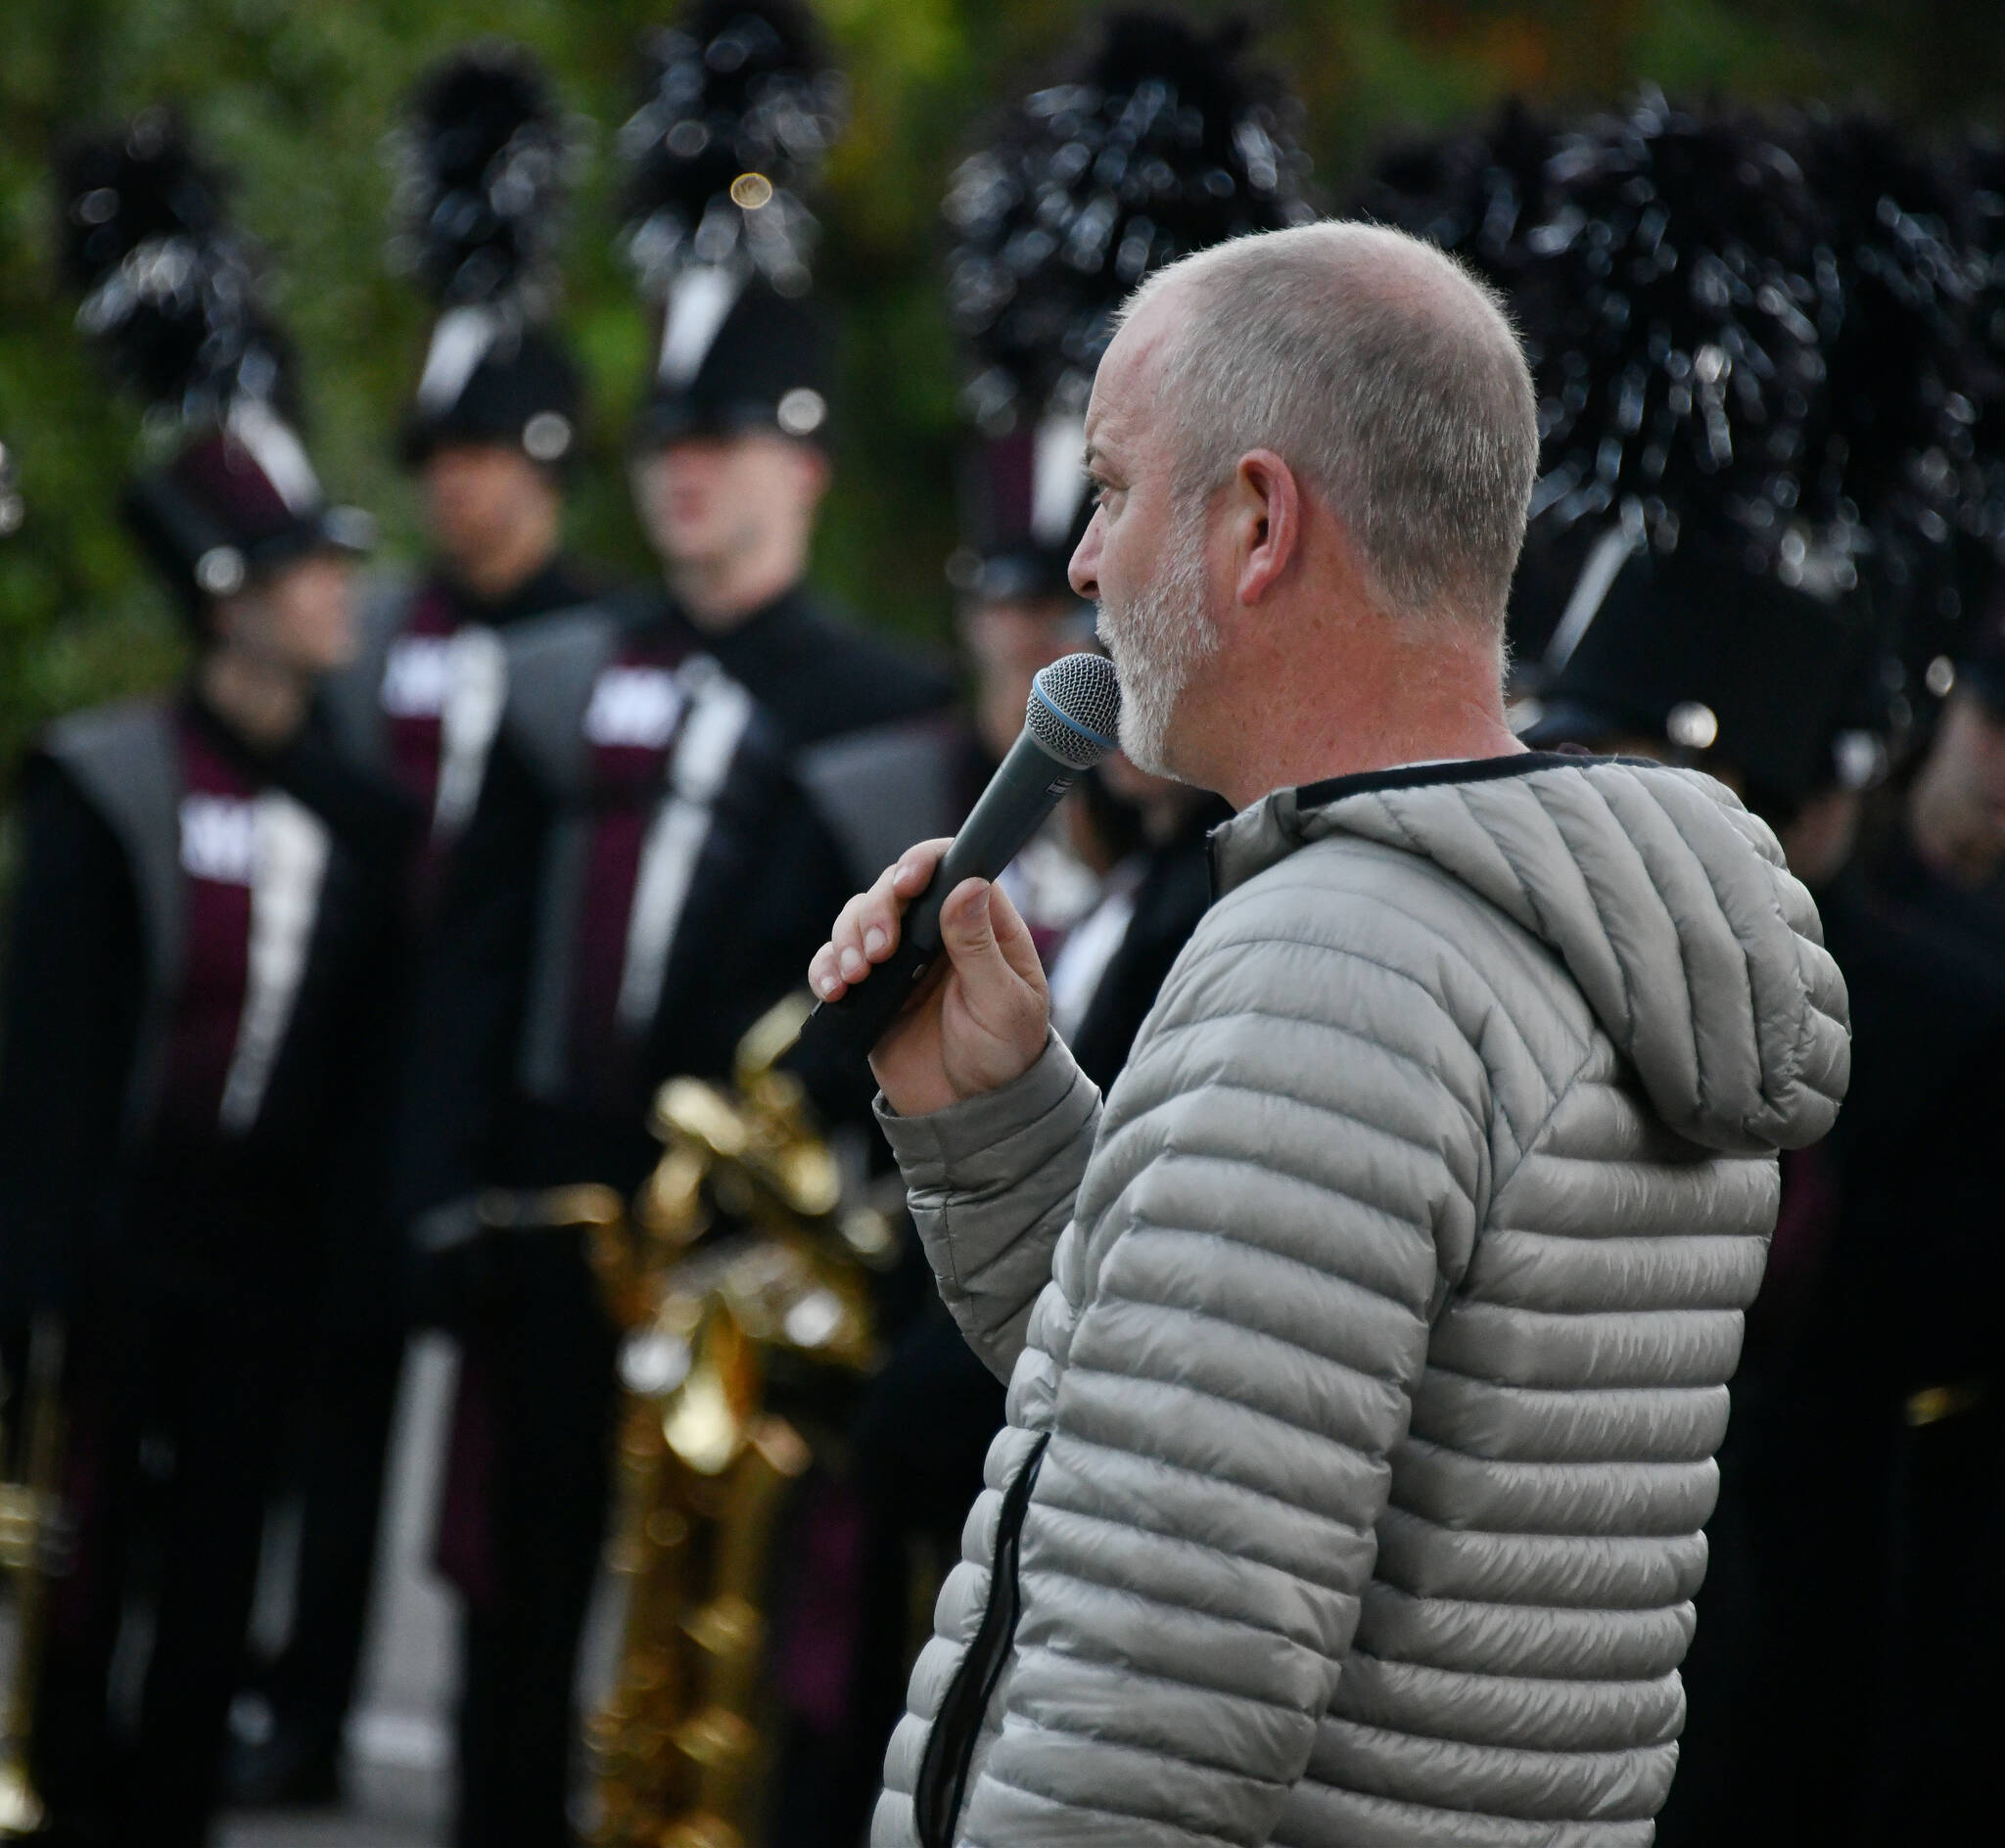 Parker Bixby, who is one of three band directors along with Jacob Krieger and Kyle Thompson, communicates with the Mercer Island High School marching band during a full dress rehearsal on Oct. 12. Andy Nystrom/ staff photo